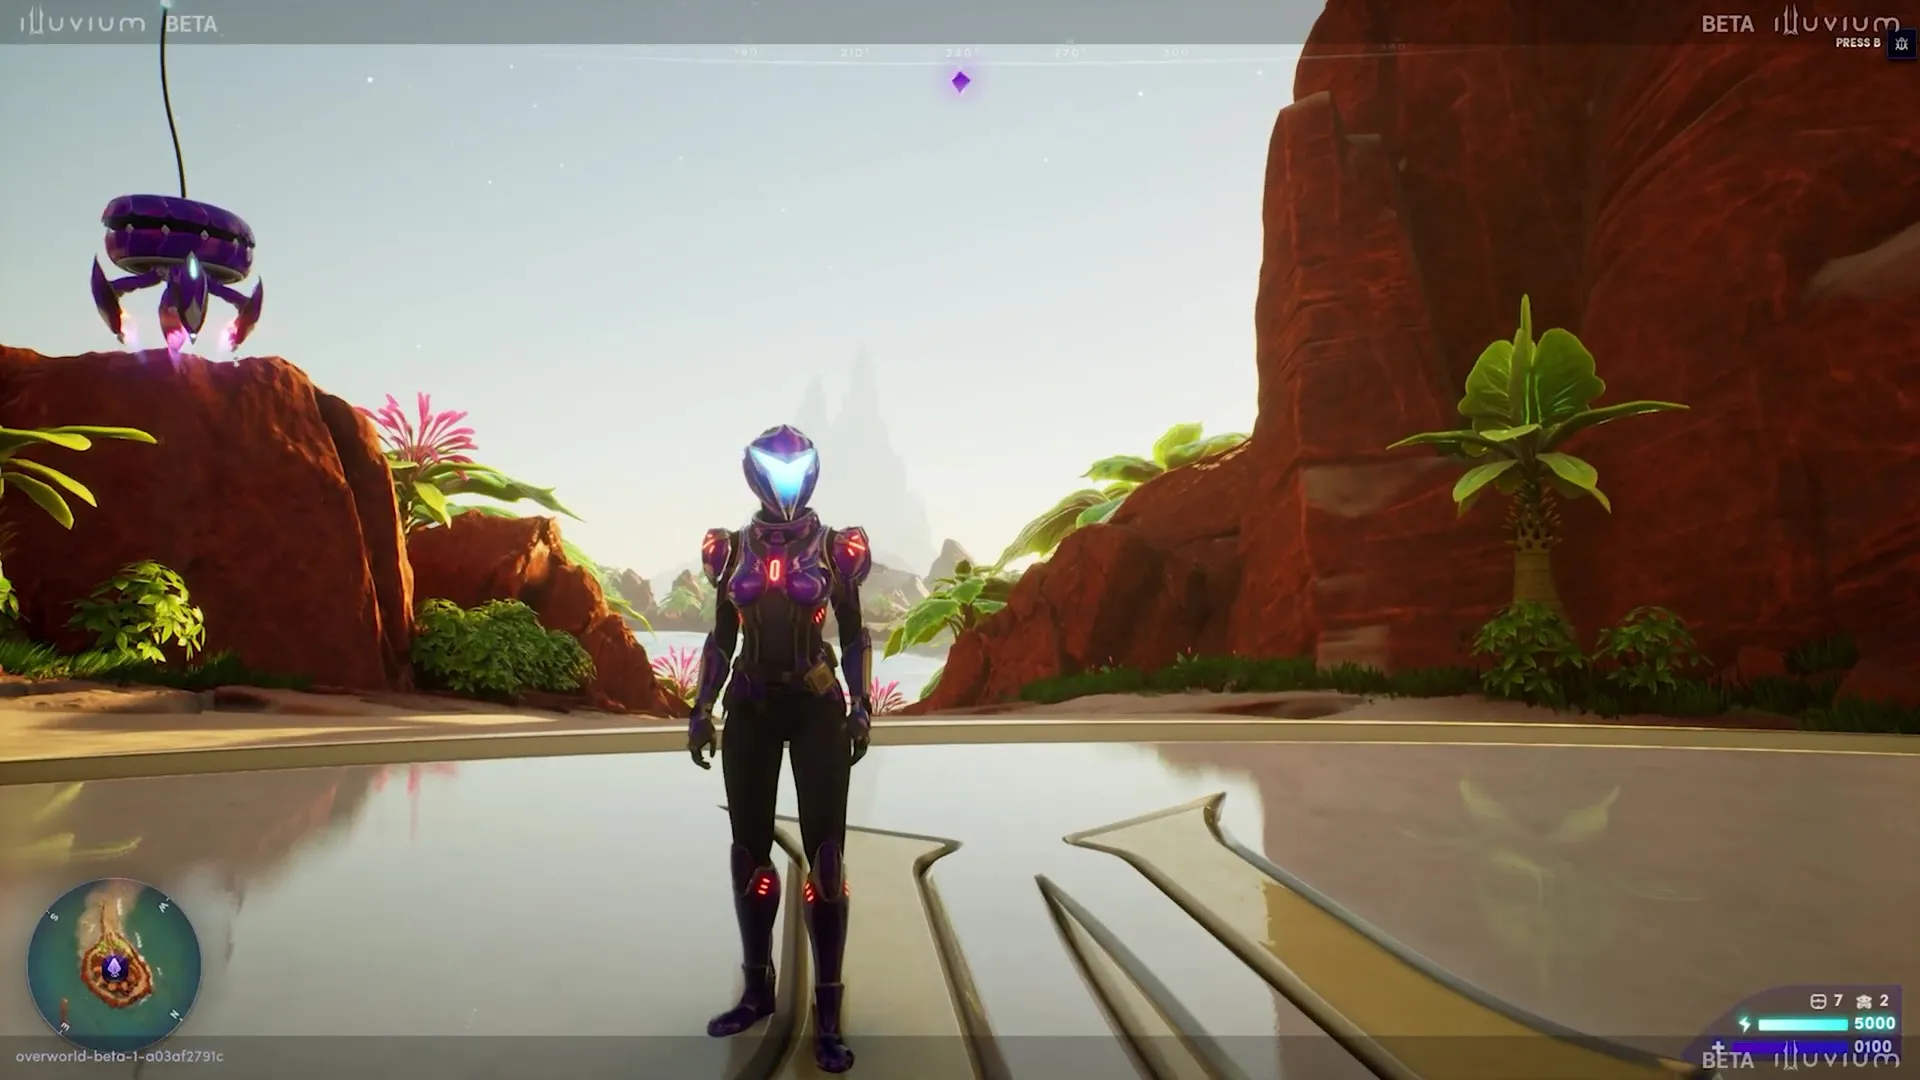 In the game, players control a character to explore the hostile planet of Illuvium Overworld. The image shows your character alongside a drone, which will help your game progress